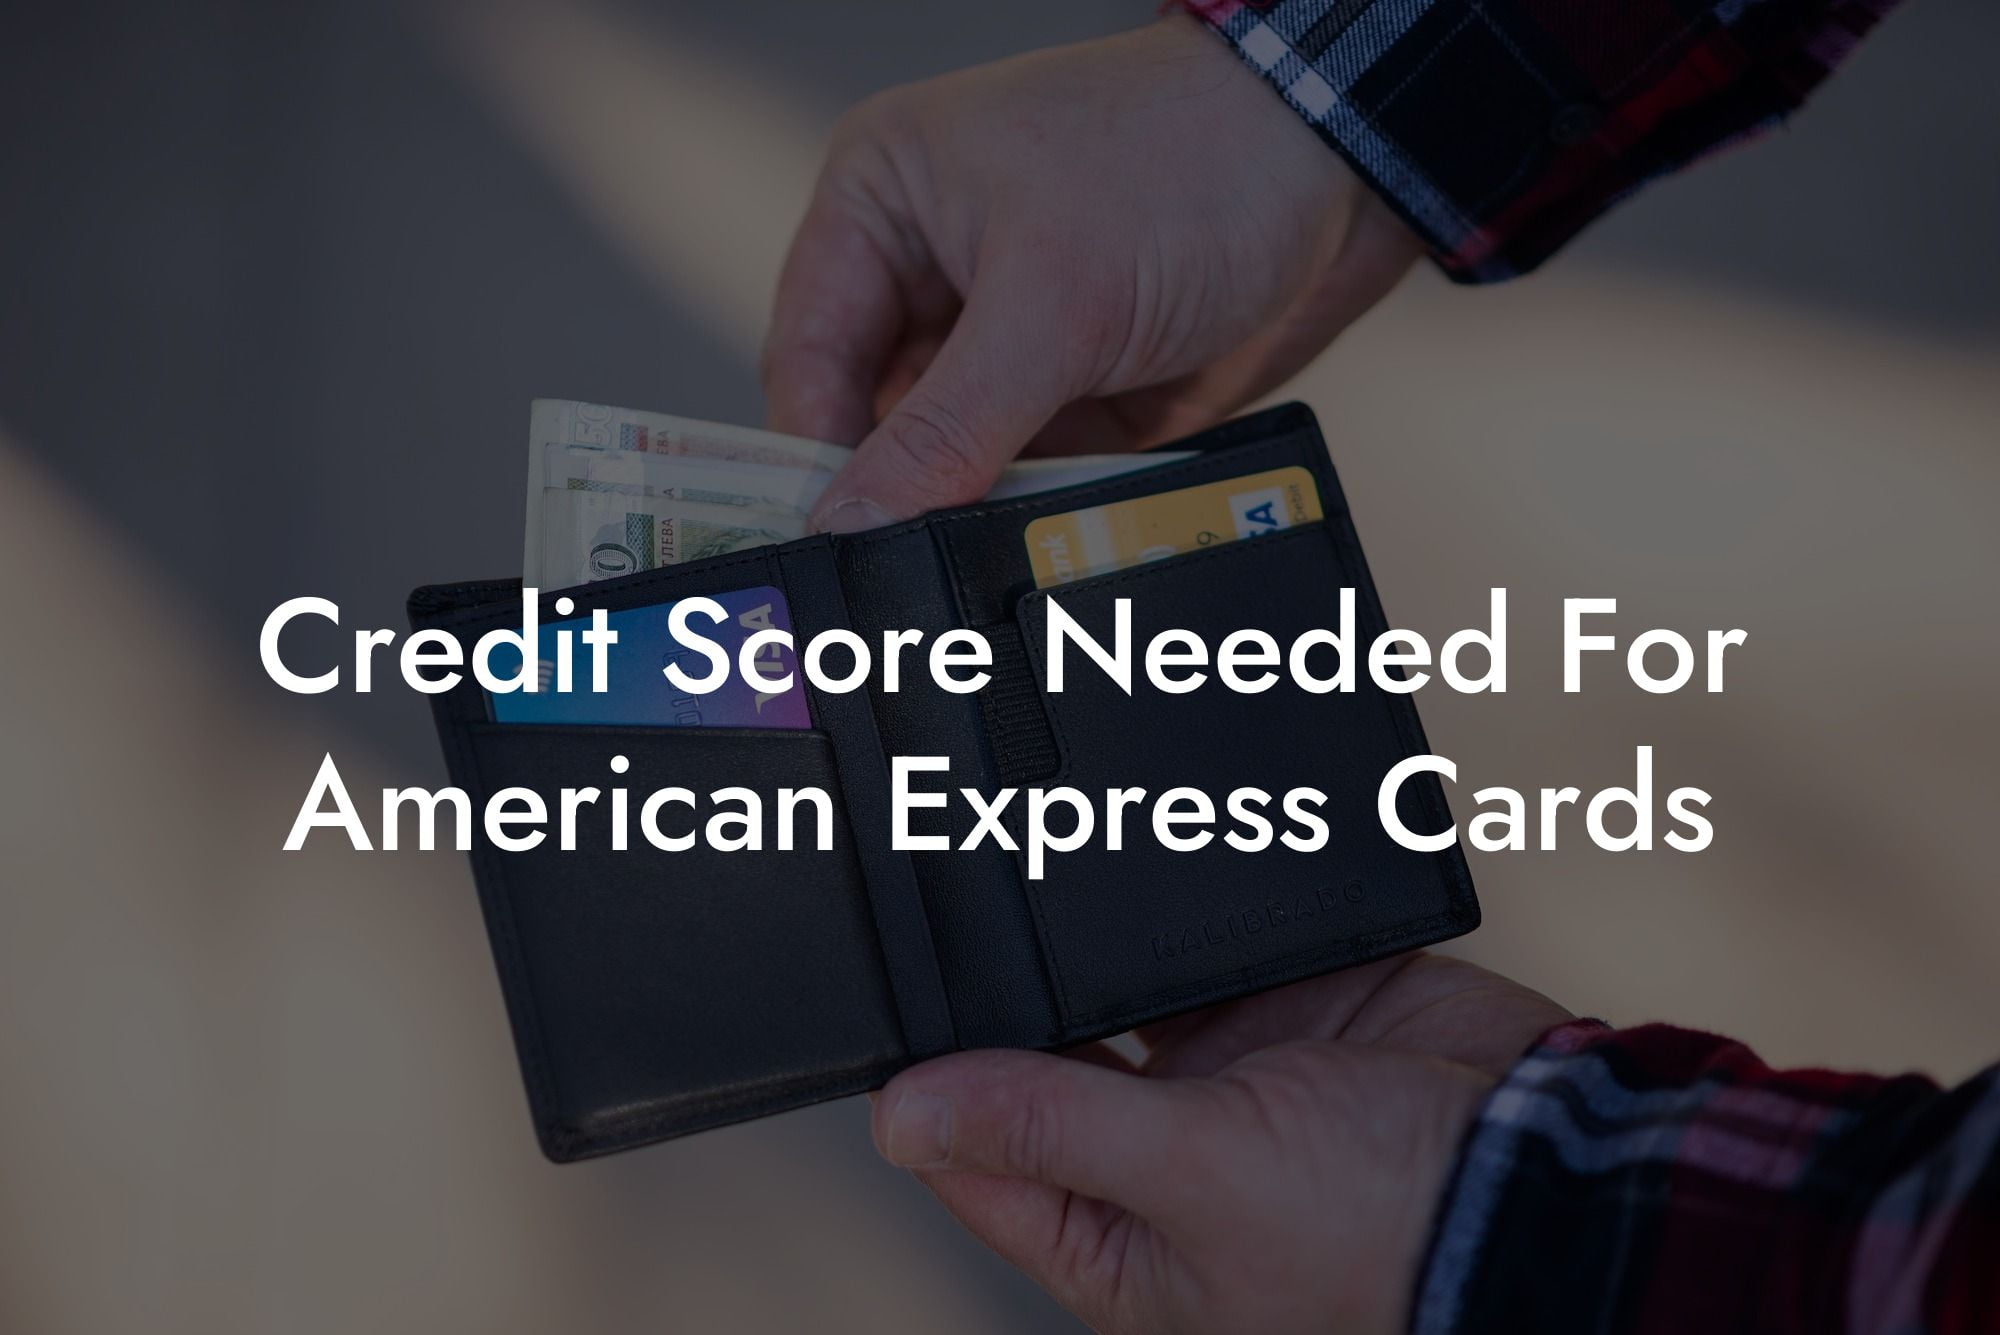 Credit Score Needed For American Express Cards